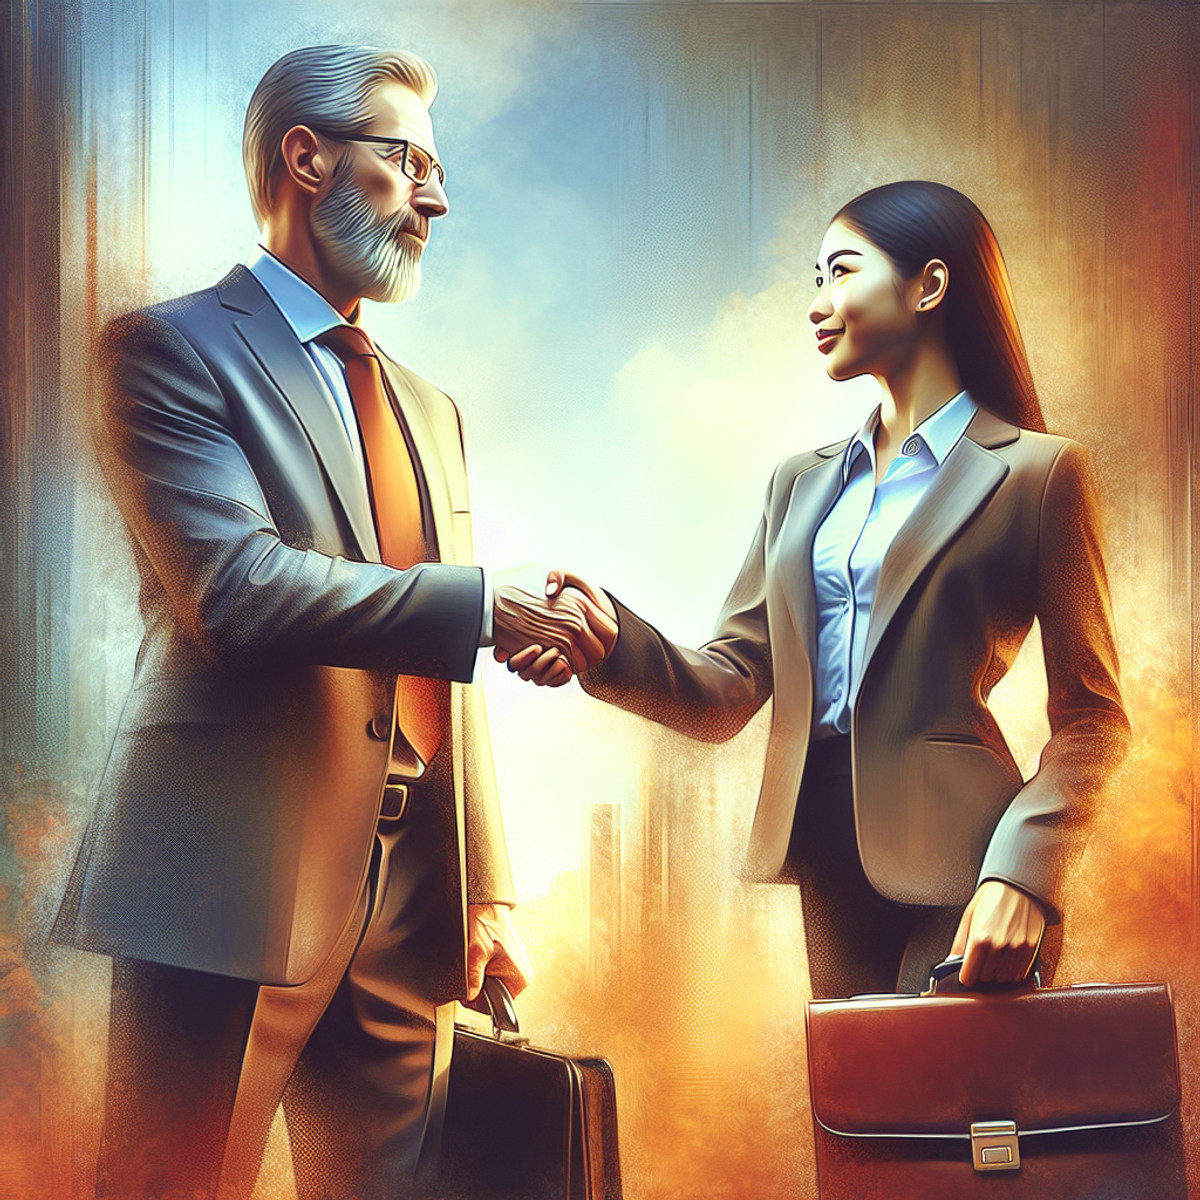 Mentorship in the Sales Industry: An experienced sales professional, a middle-aged Caucasian male, is shaking hands with a younger, enthusiastic South Asian female hire. The mentor exudes confidence while the new hire displays an eager-to-learn attitude.